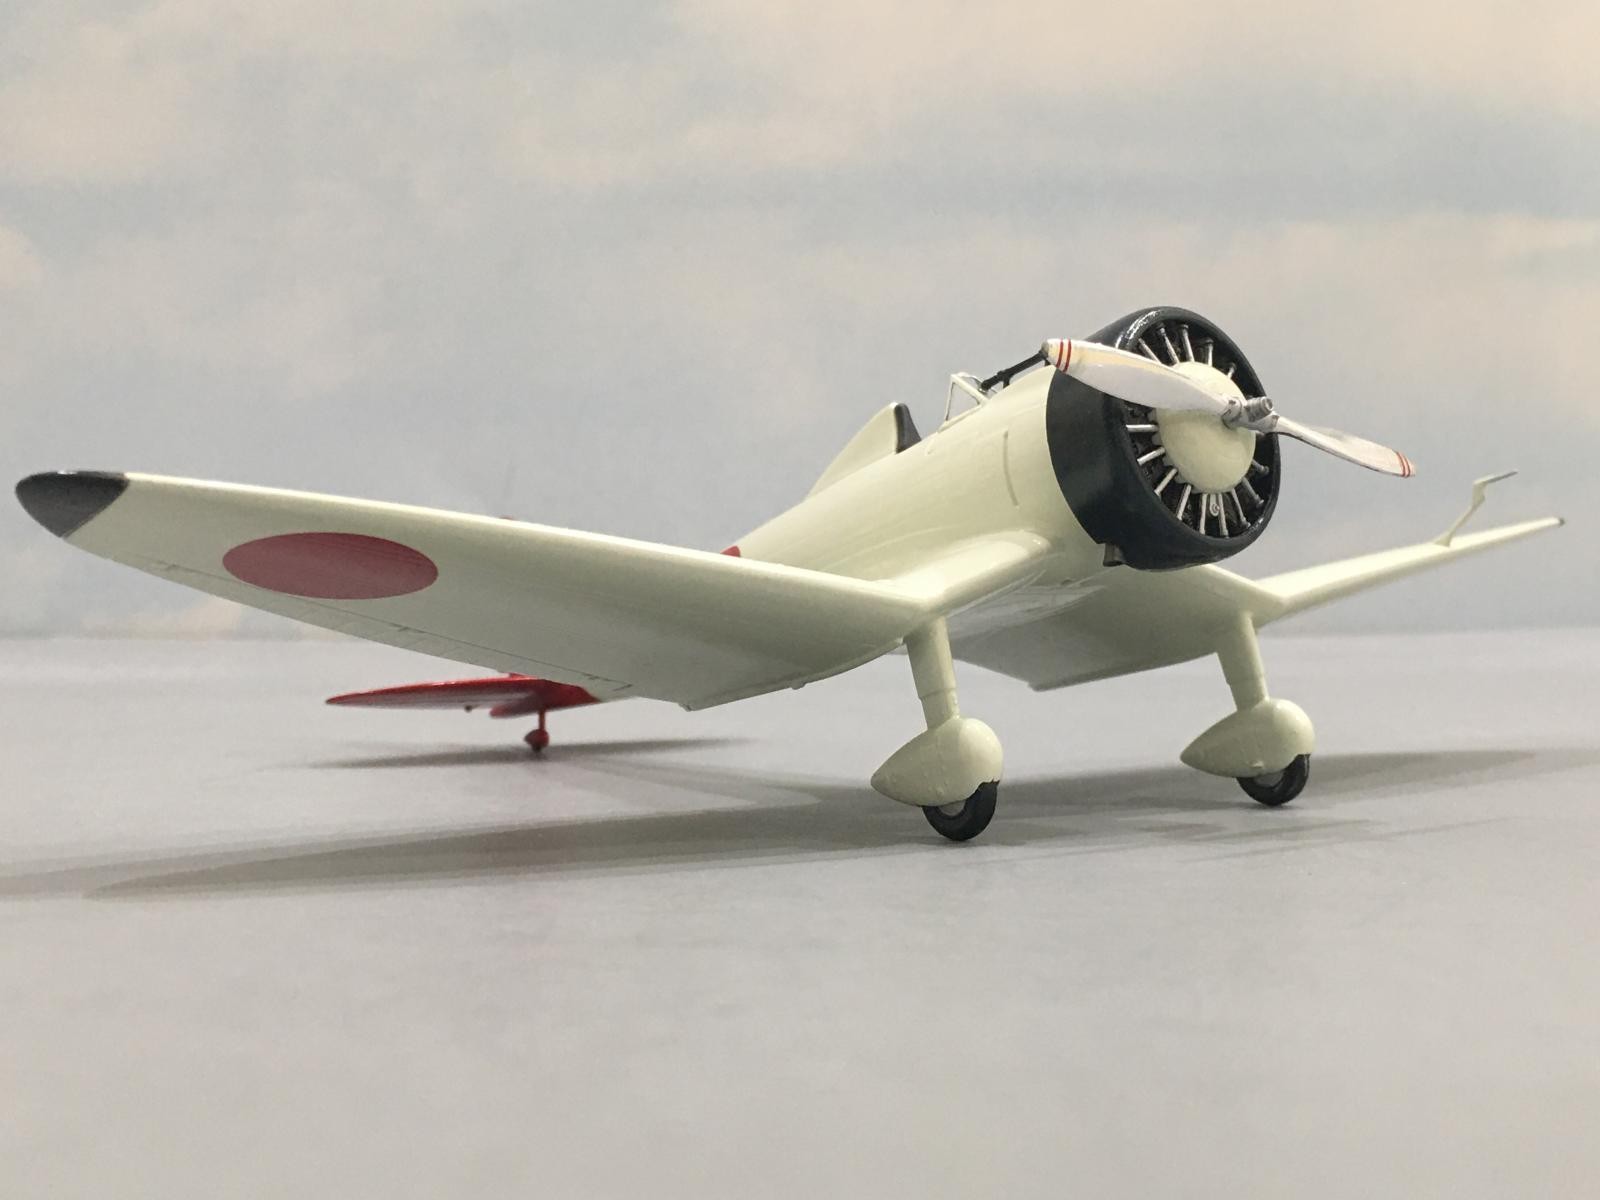 Fine Molds Ghibli 1/48 The Wind Rises Type9 Single Seat Fighter Fg7 for sale online 